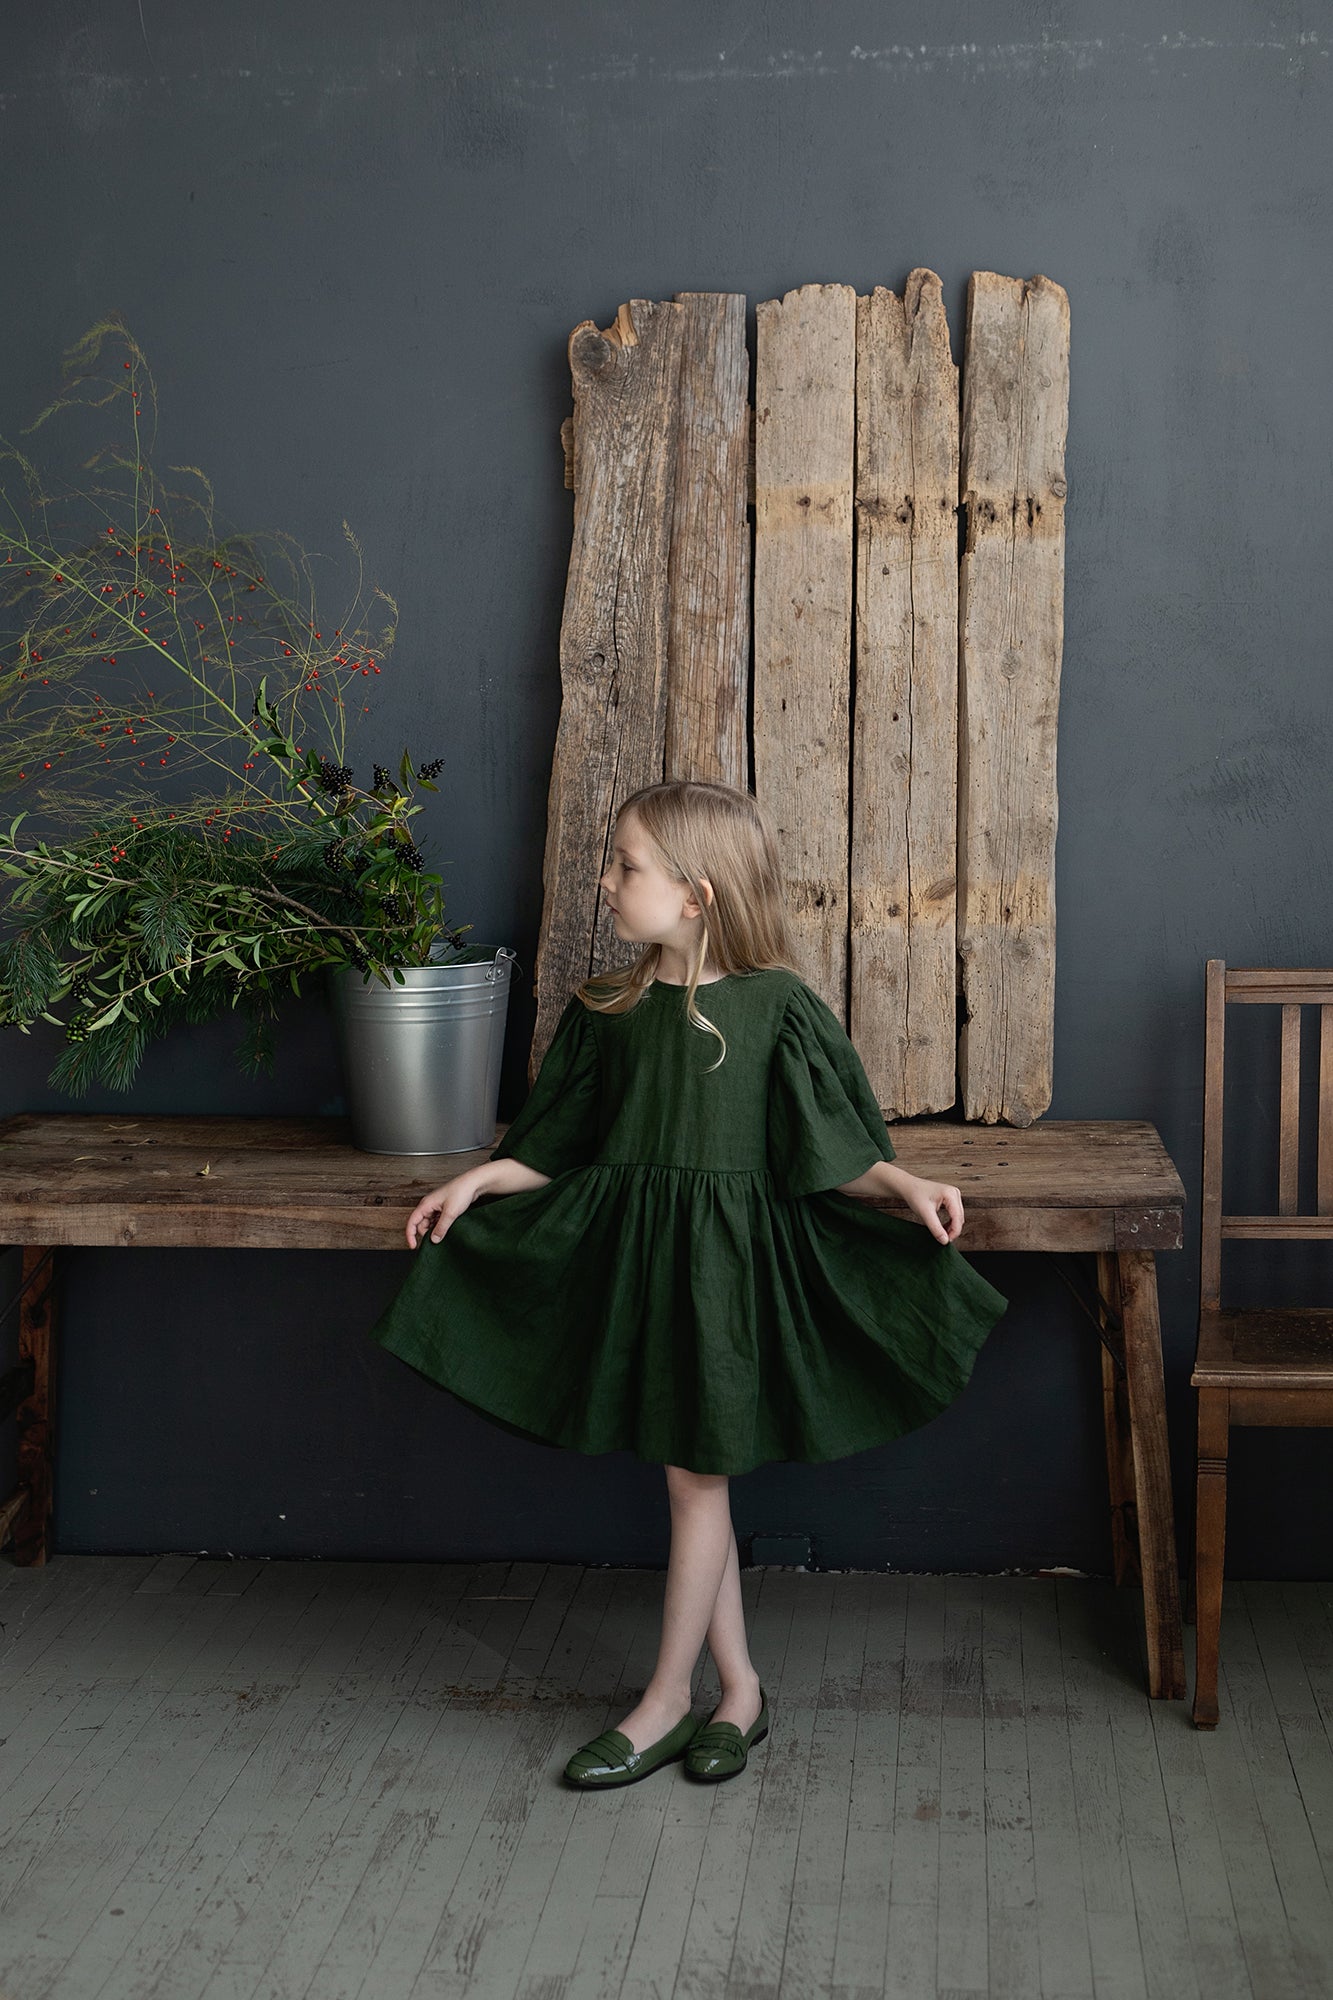 a little girl in a green dress standing in front of a wooden bench